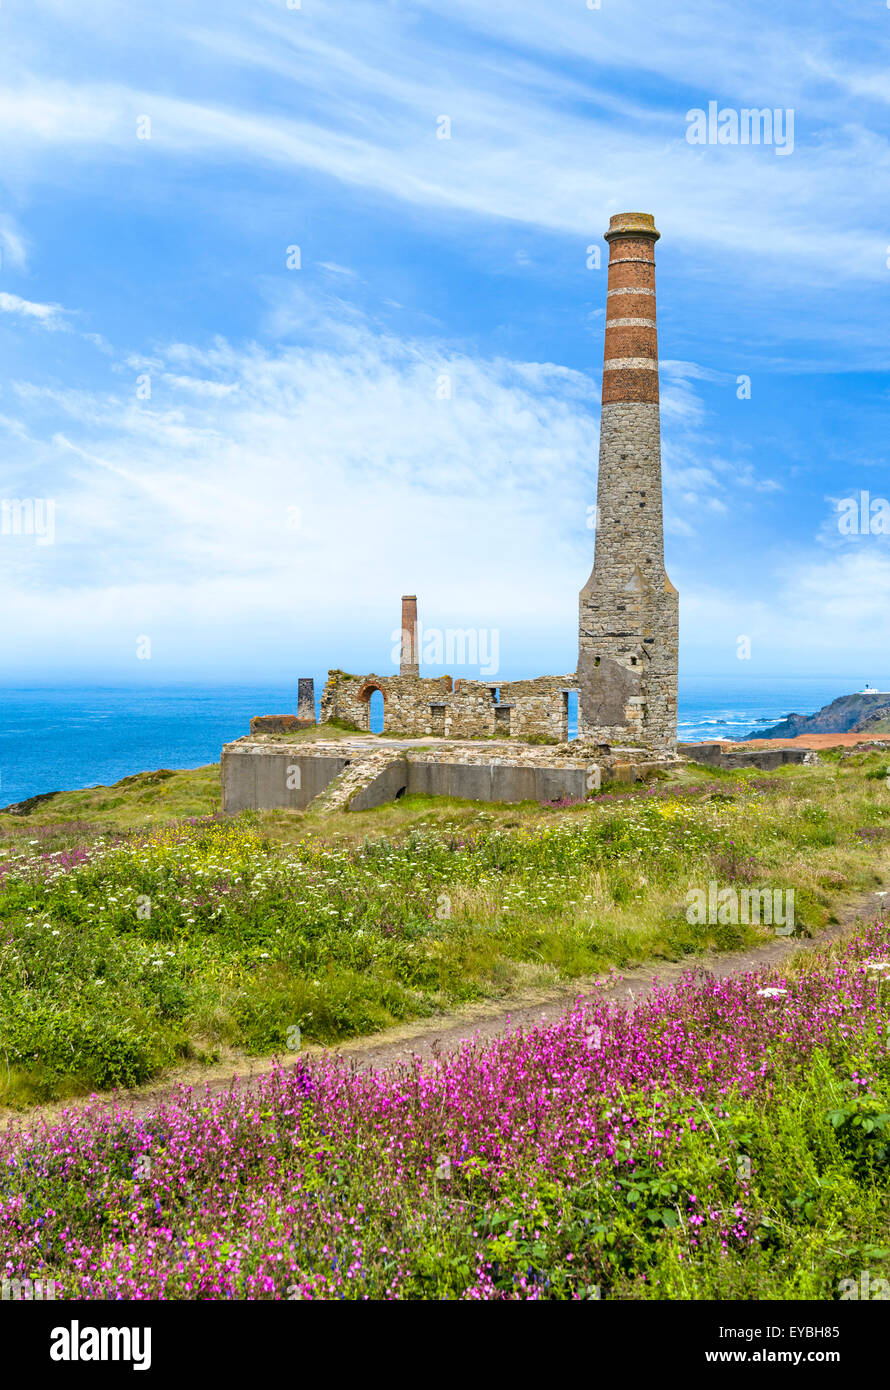 The old Compressor House chimney at the Levant tin mine, Trewellard, Pendeen, near St Just, Cornwall, England, UK Stock Photo